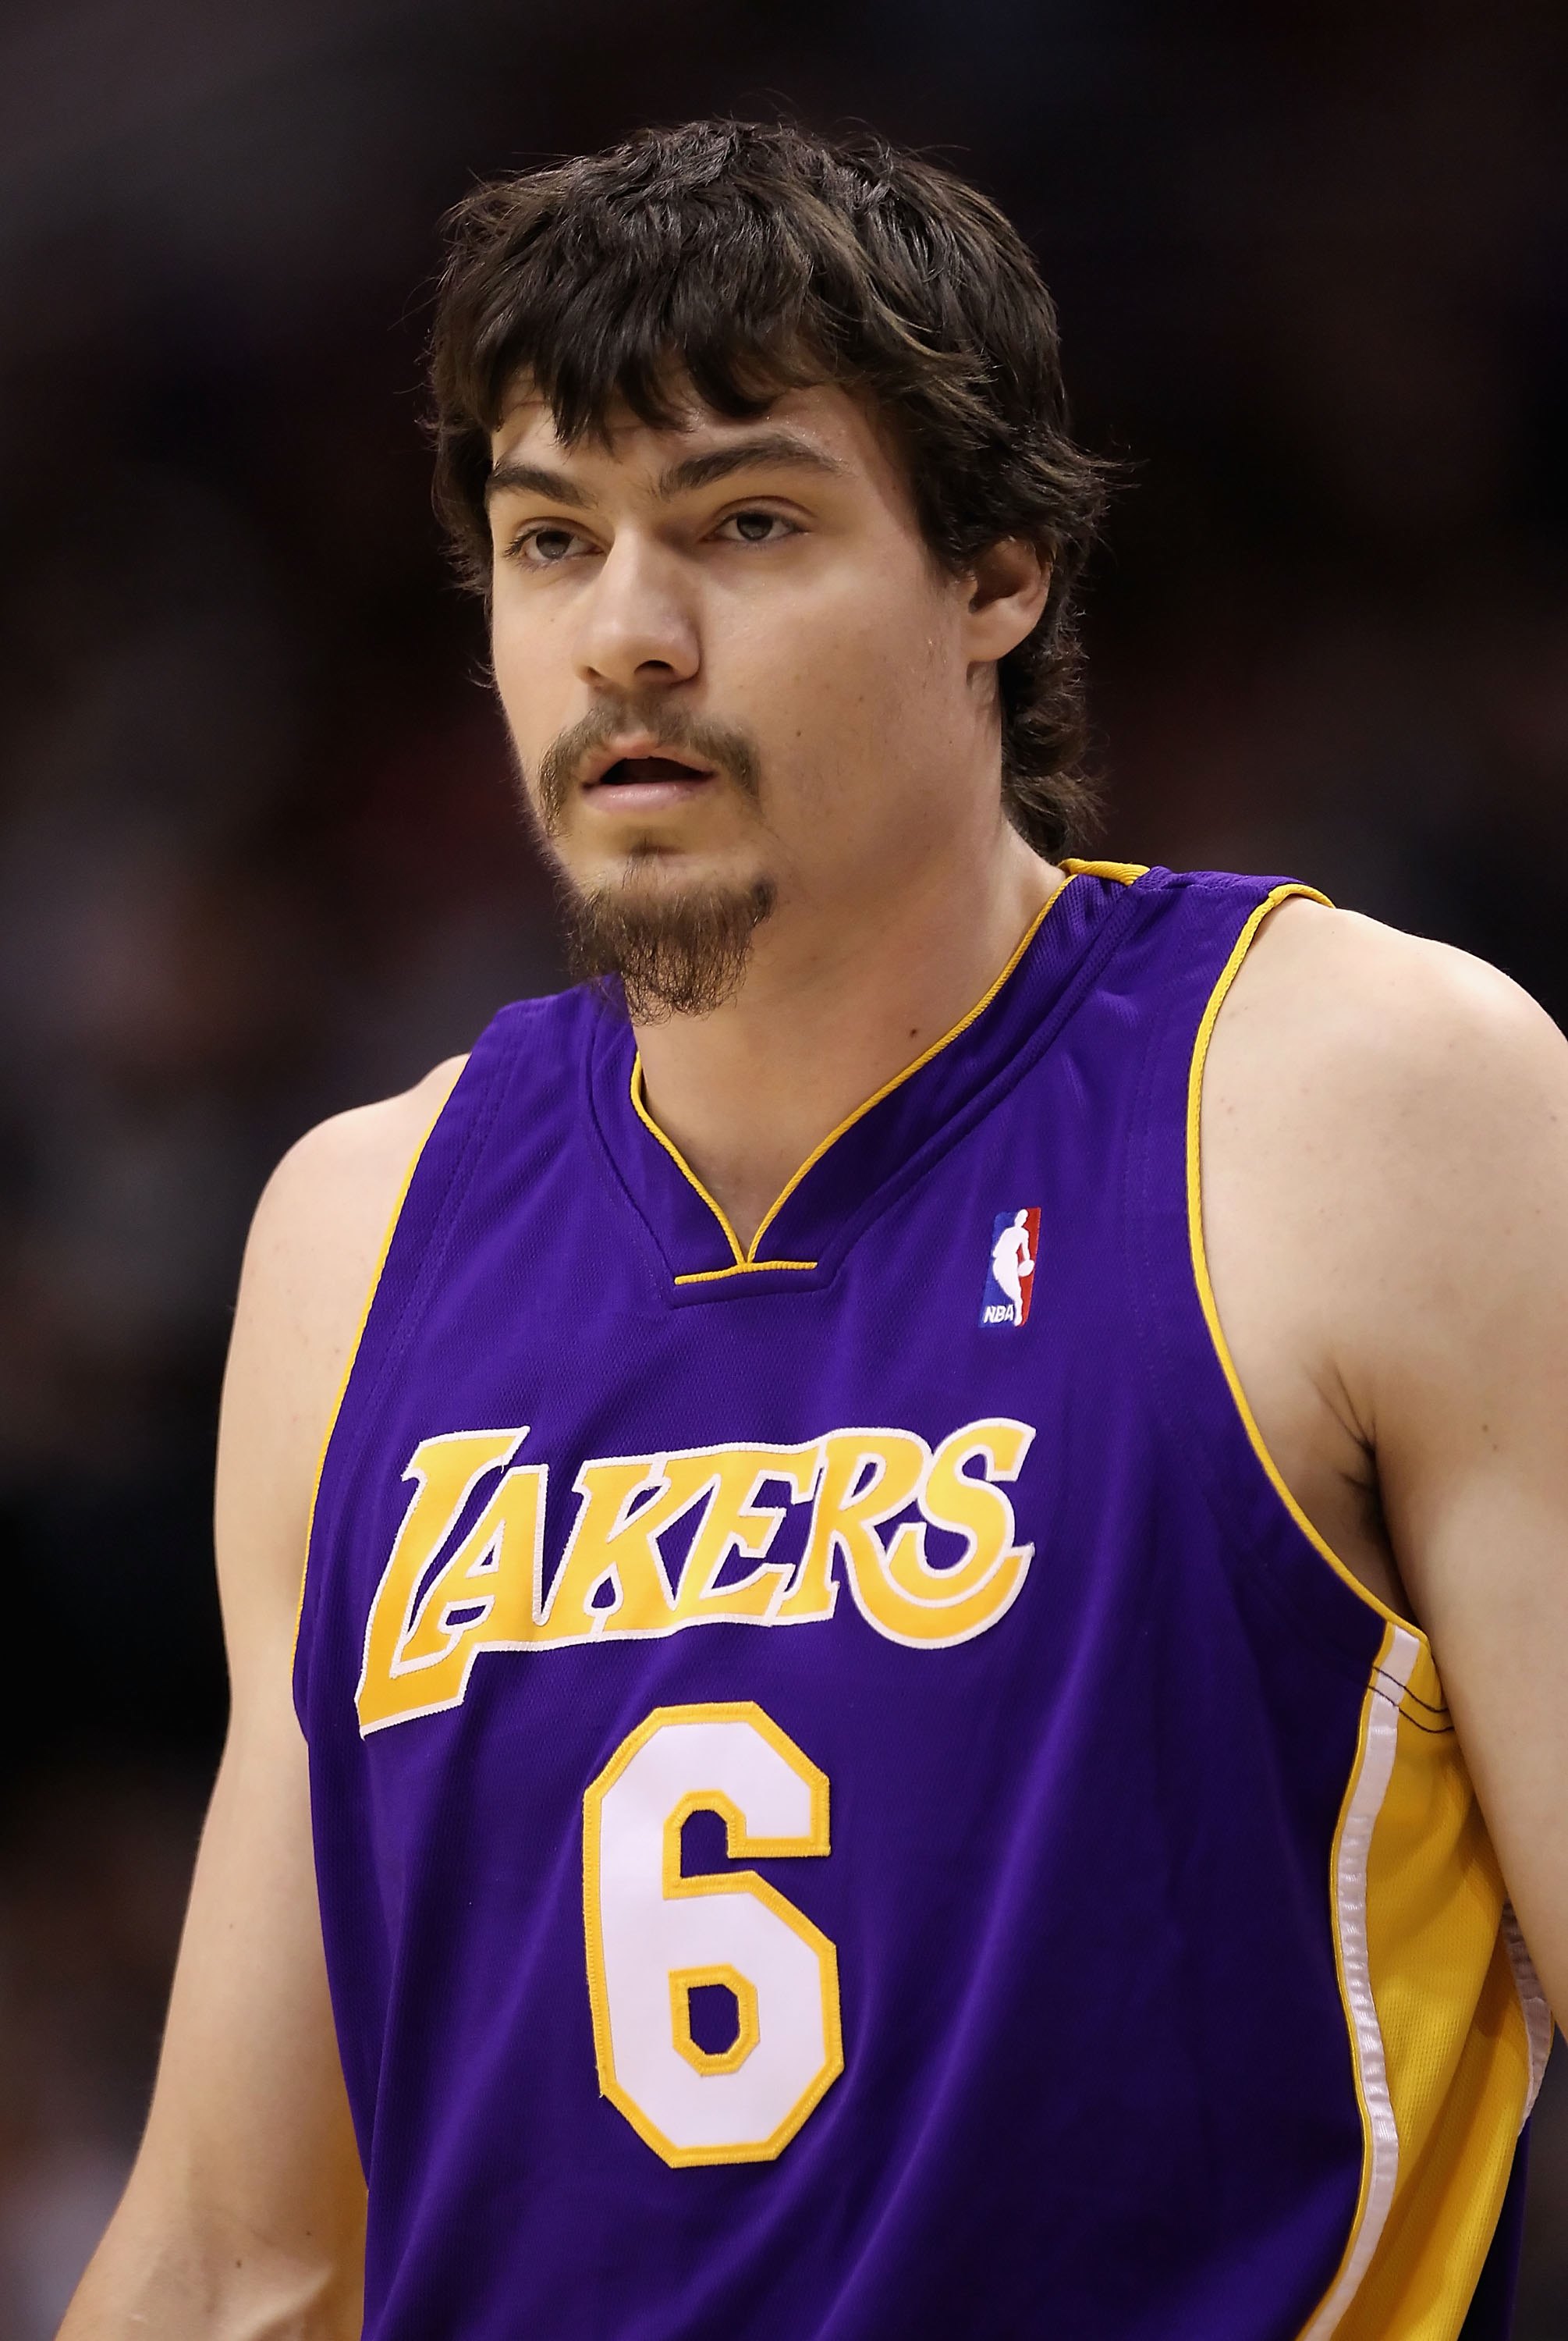 PHOENIX - MARCH 12:  Adam Morrison #6 of the Los Angeles Lakers in action during the NBA game against the Phoenix Suns at US Airways Center on March 12, 2010 in Phoenix, Arizona.  The Lakers defeated the Suns 102-96.  NOTE TO USER: User expressly acknowle